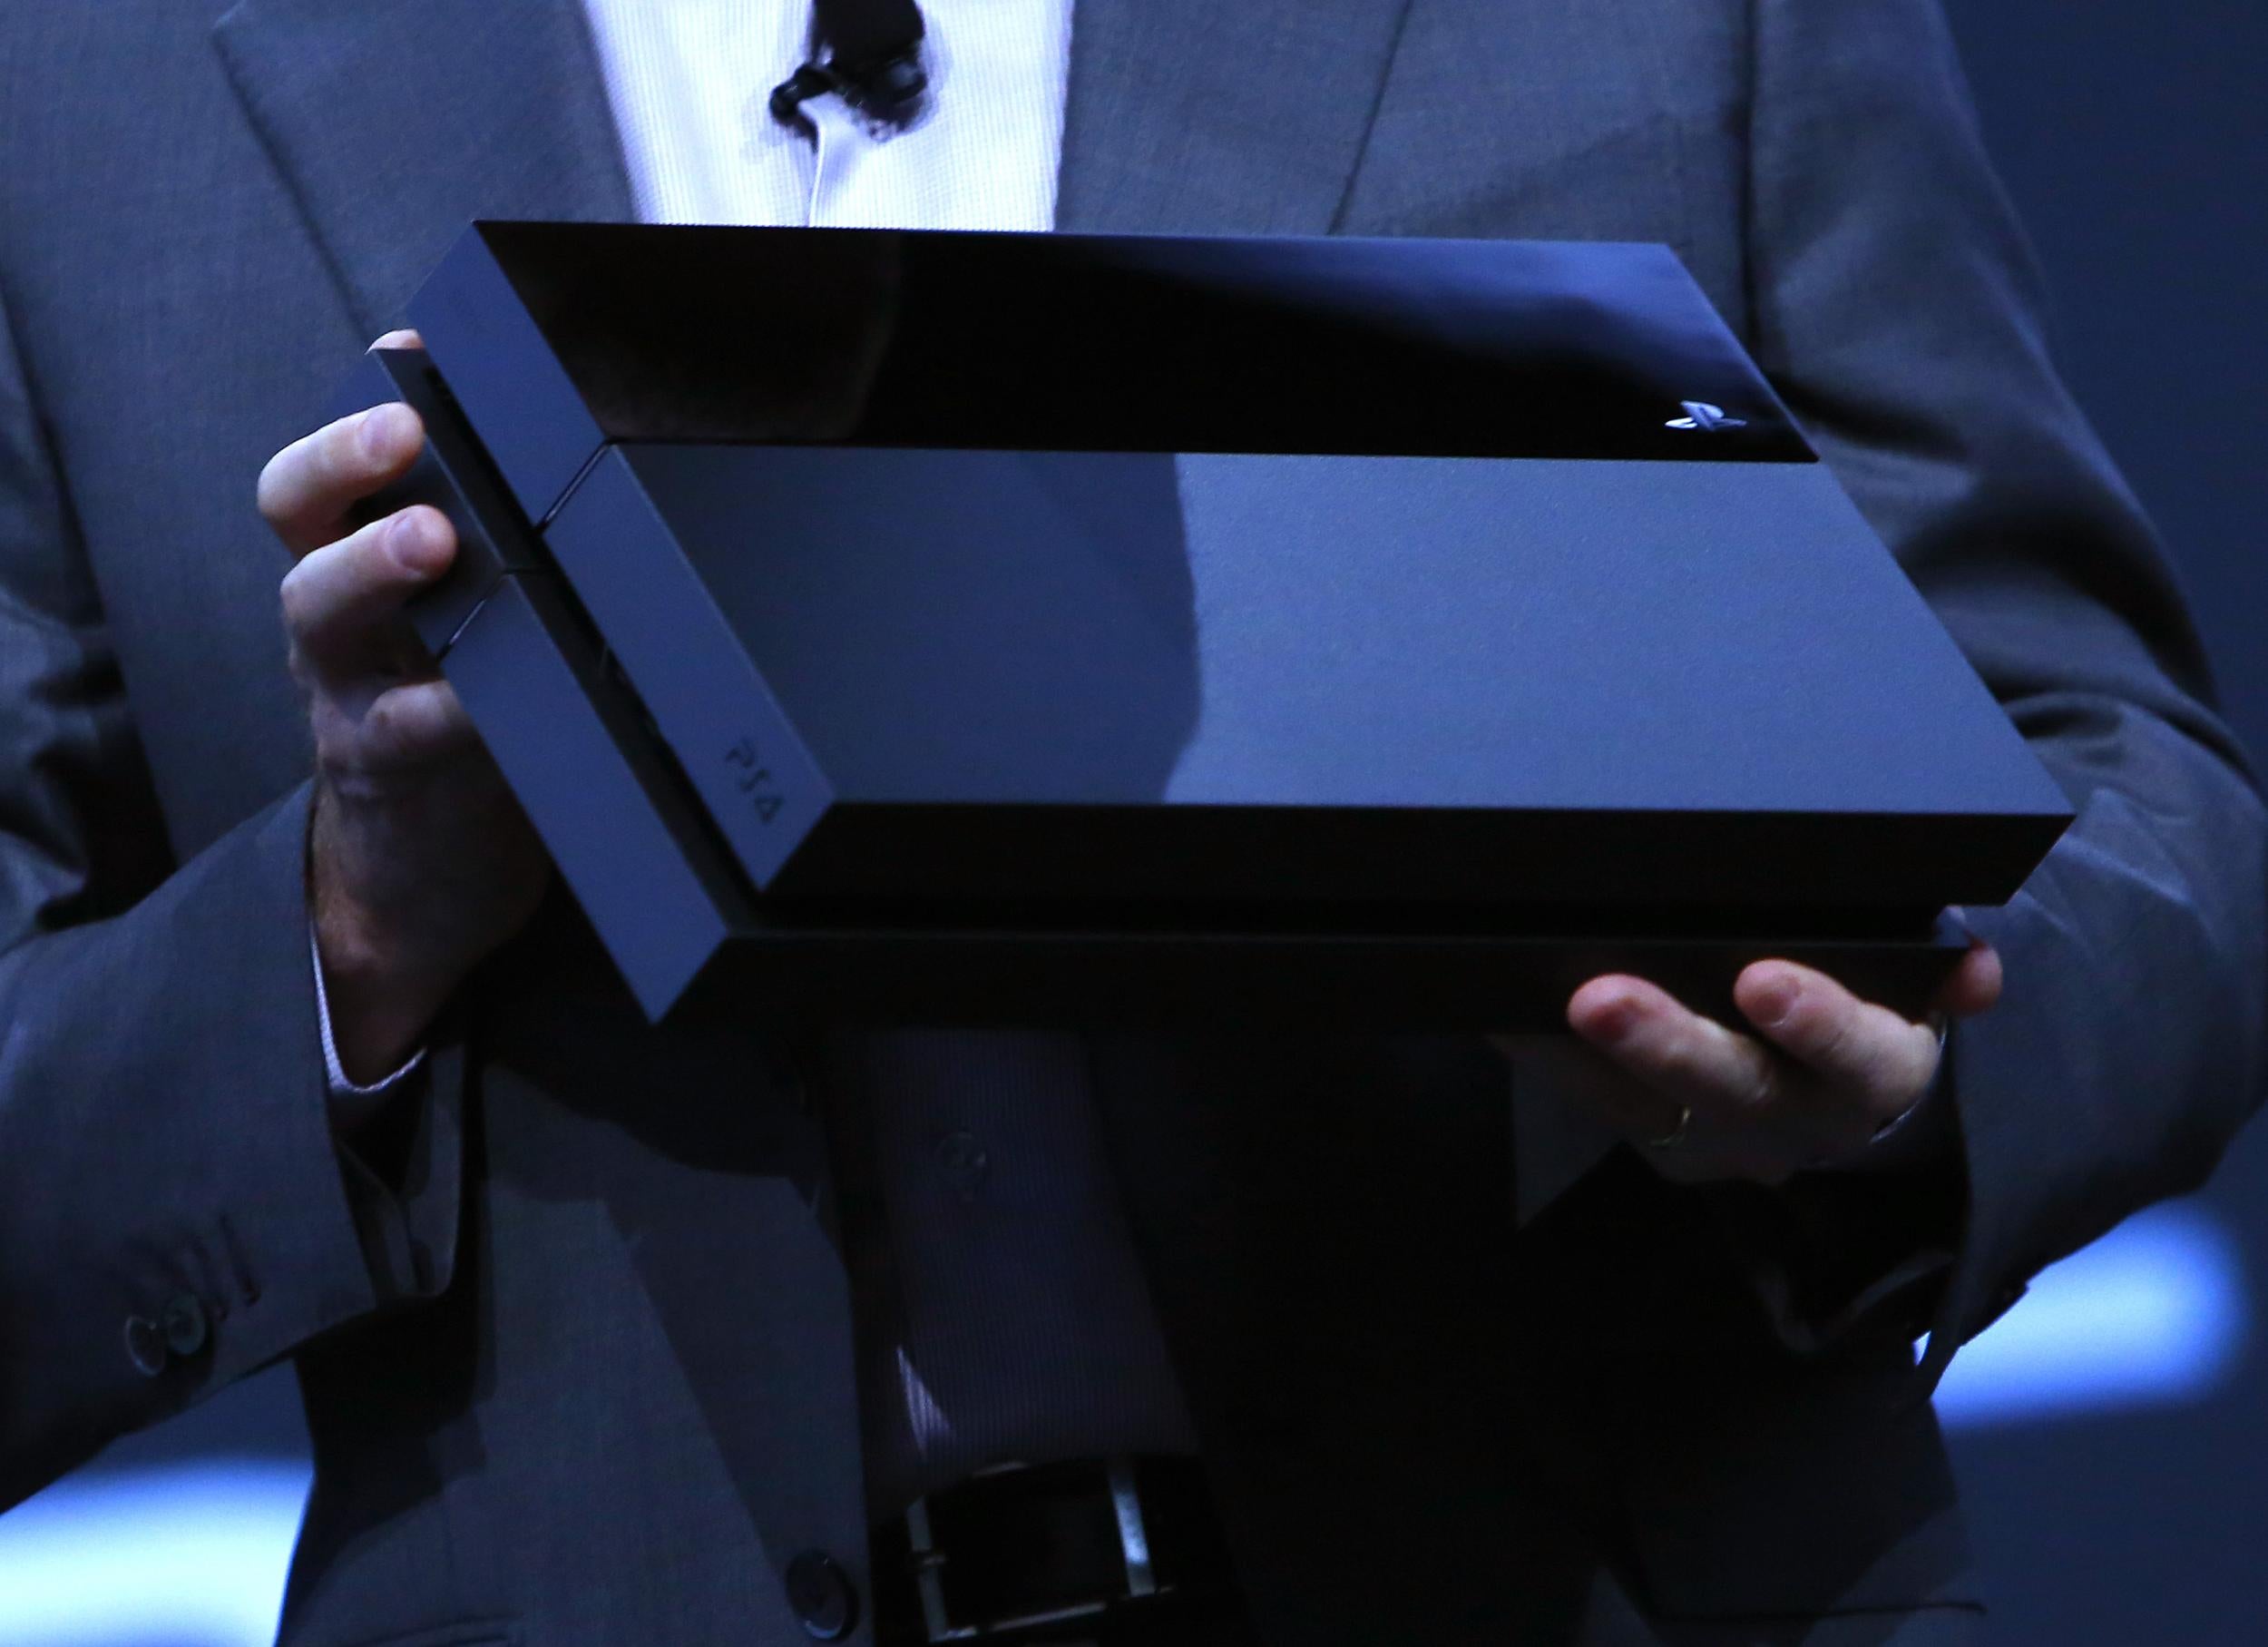 A PS4 price cut in Europe has been a long time coming